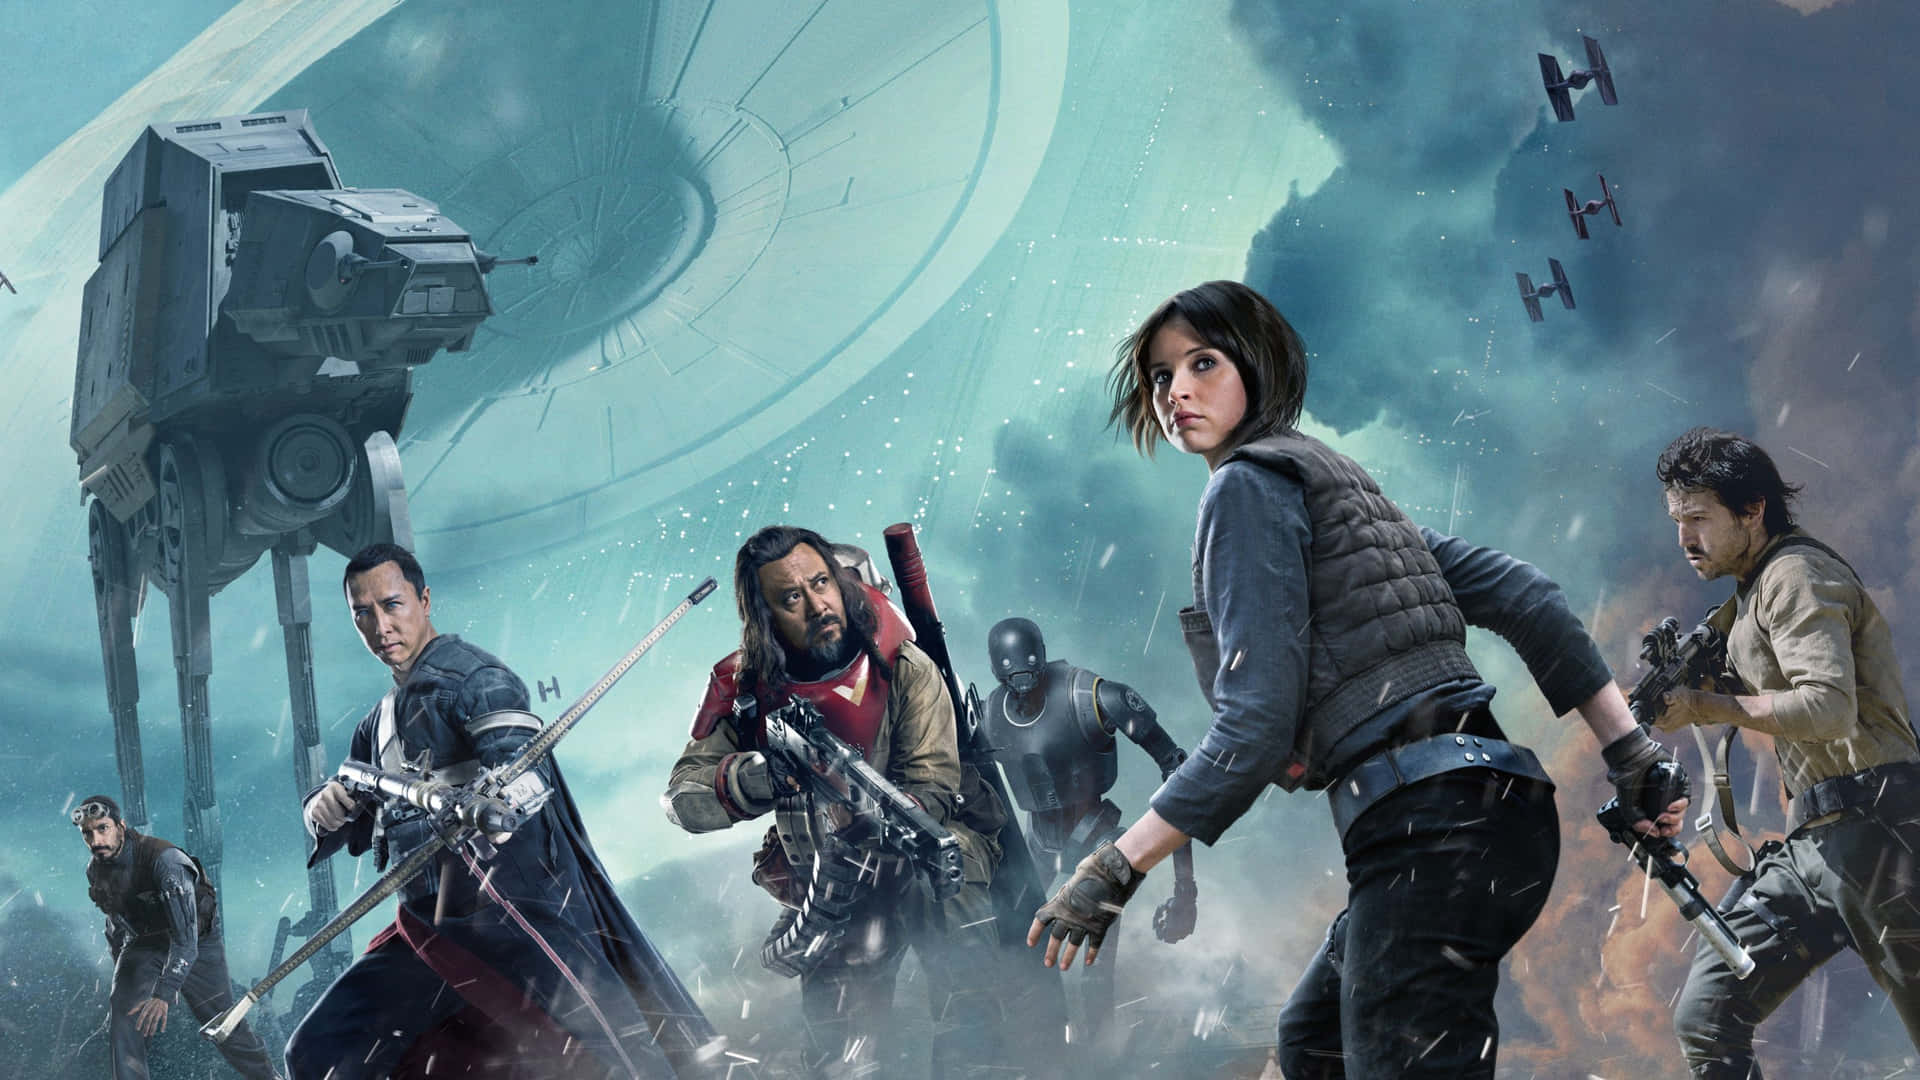 The brave group from Rogue One ready for battle against the Empire Wallpaper